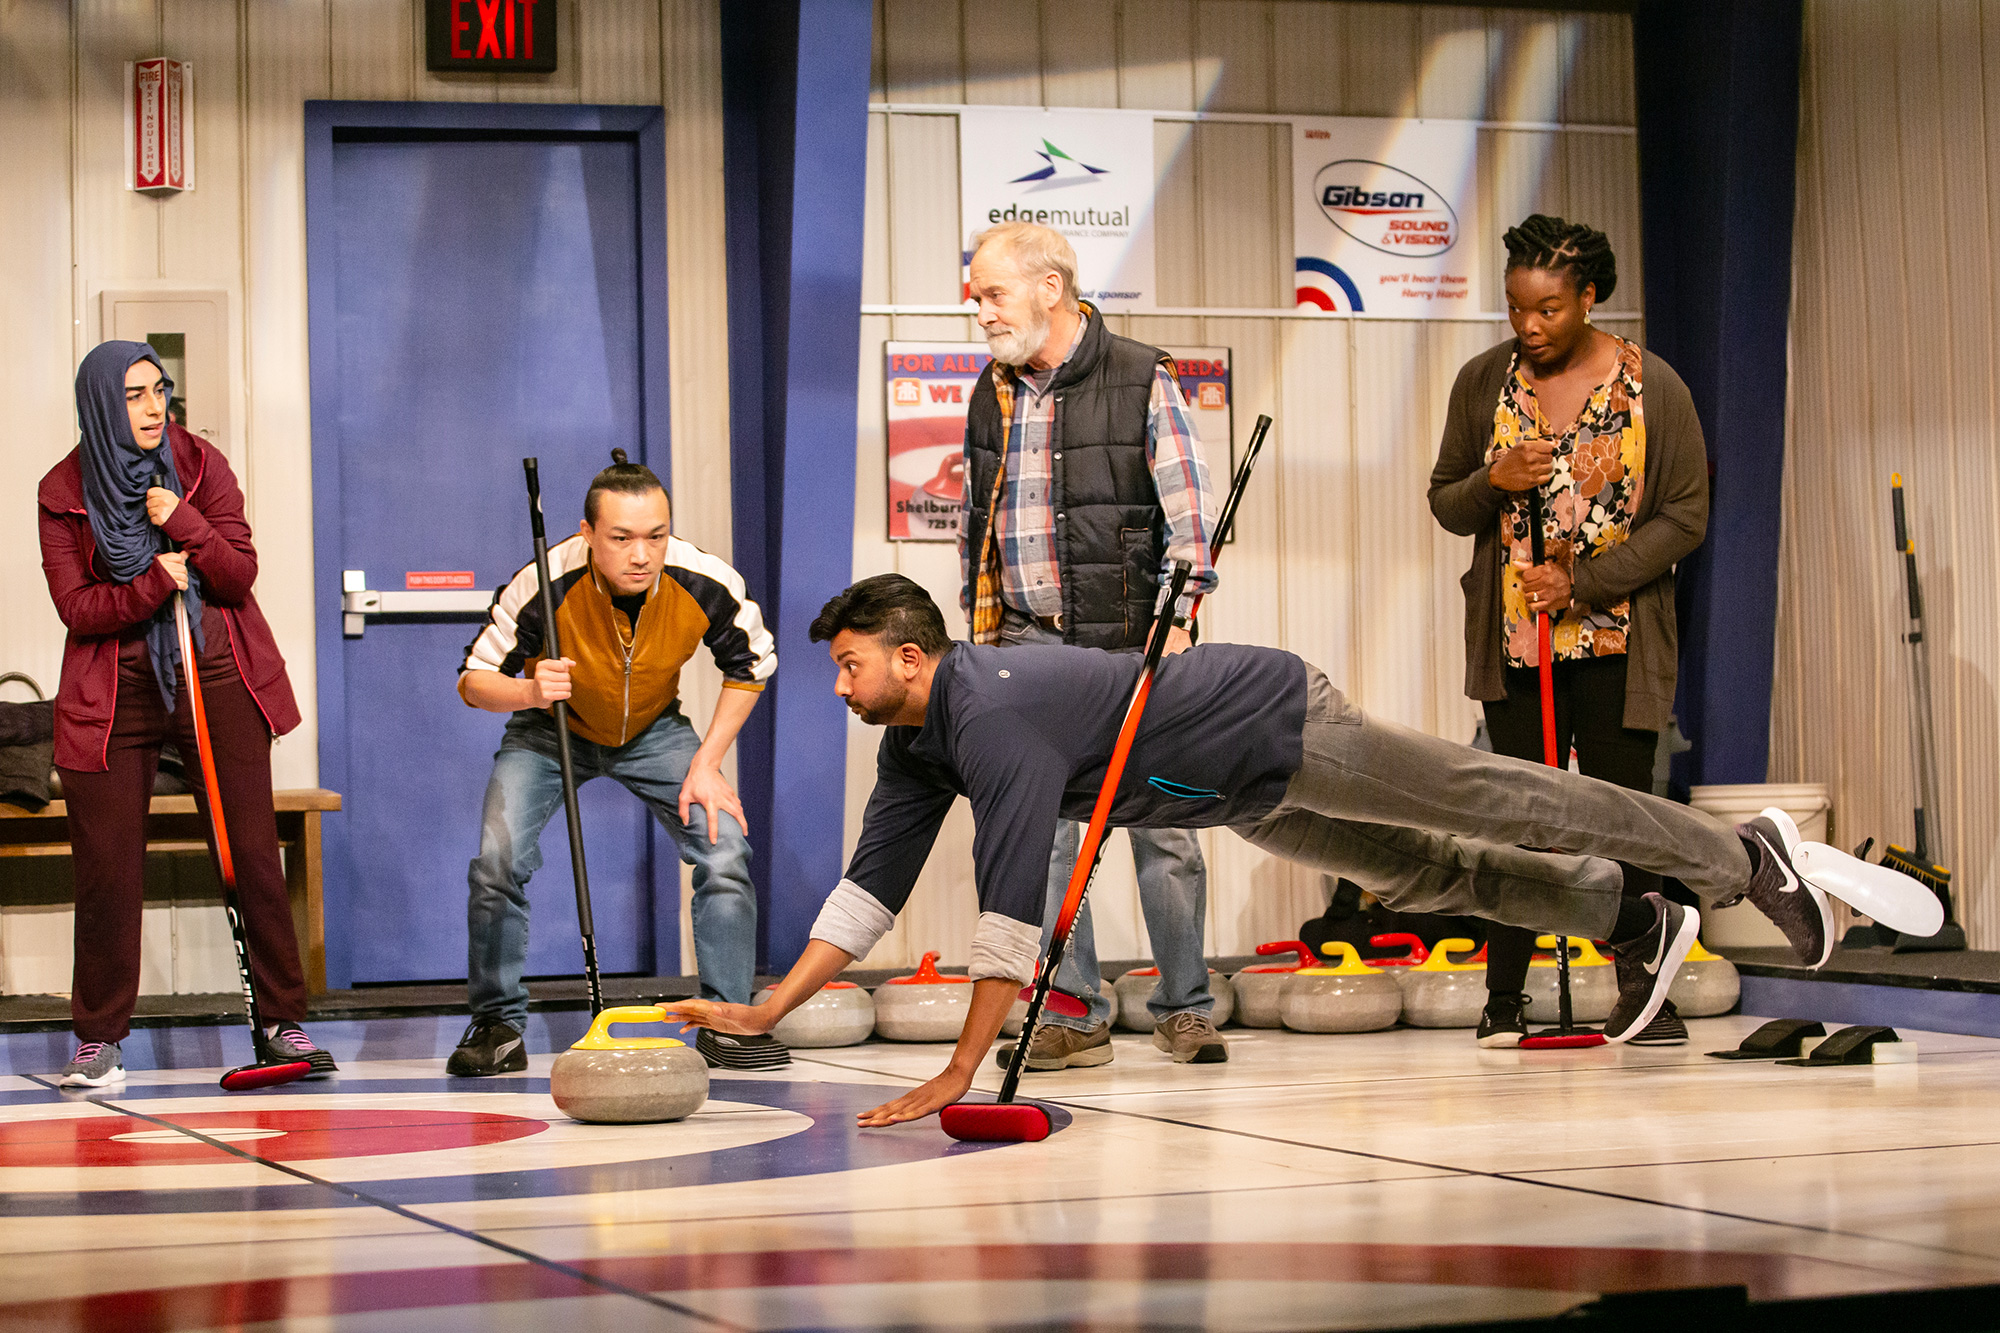 Zaynna Khalife, Norman Yeung, Andrew Prashad, John Jarvis, and Chiamaka Glory in The New Canadian Curling Club, Drayton Entertainment, 2023 Season. Directed by Jane Spence; Set Design by Beckie Morris; Costume Design by Alex Amini; Lighting Design by Jeff JohnstonCollins; Stage Manager Grace Batten; Assistant Stage Manager Rebecca Miller; Photography by Jenni Grandfield.